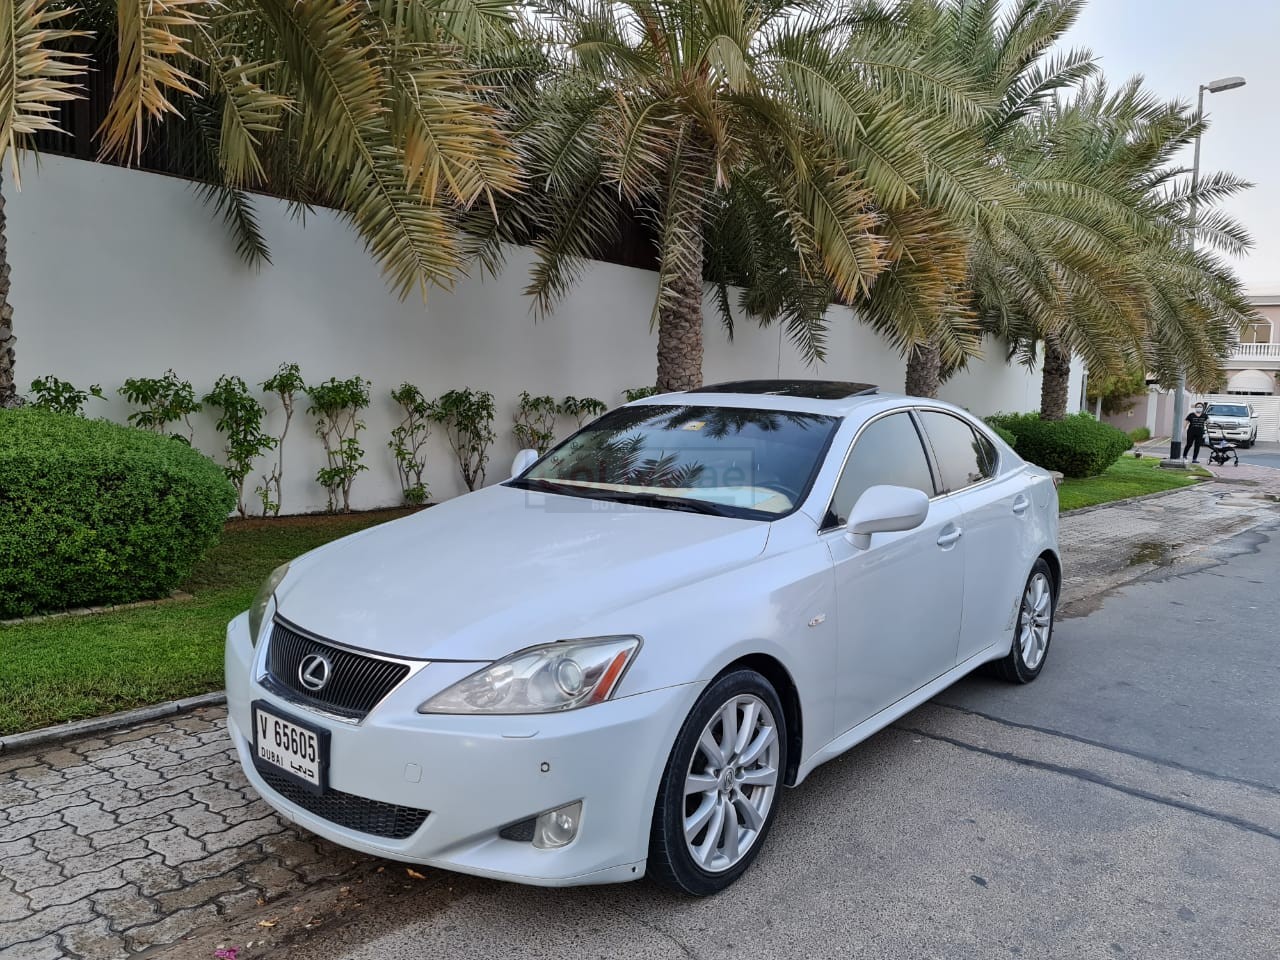 LEXUS IS300 2007 TOP OF THE PEARL WHITE ACCIDENT FREE CAR FOR SALE